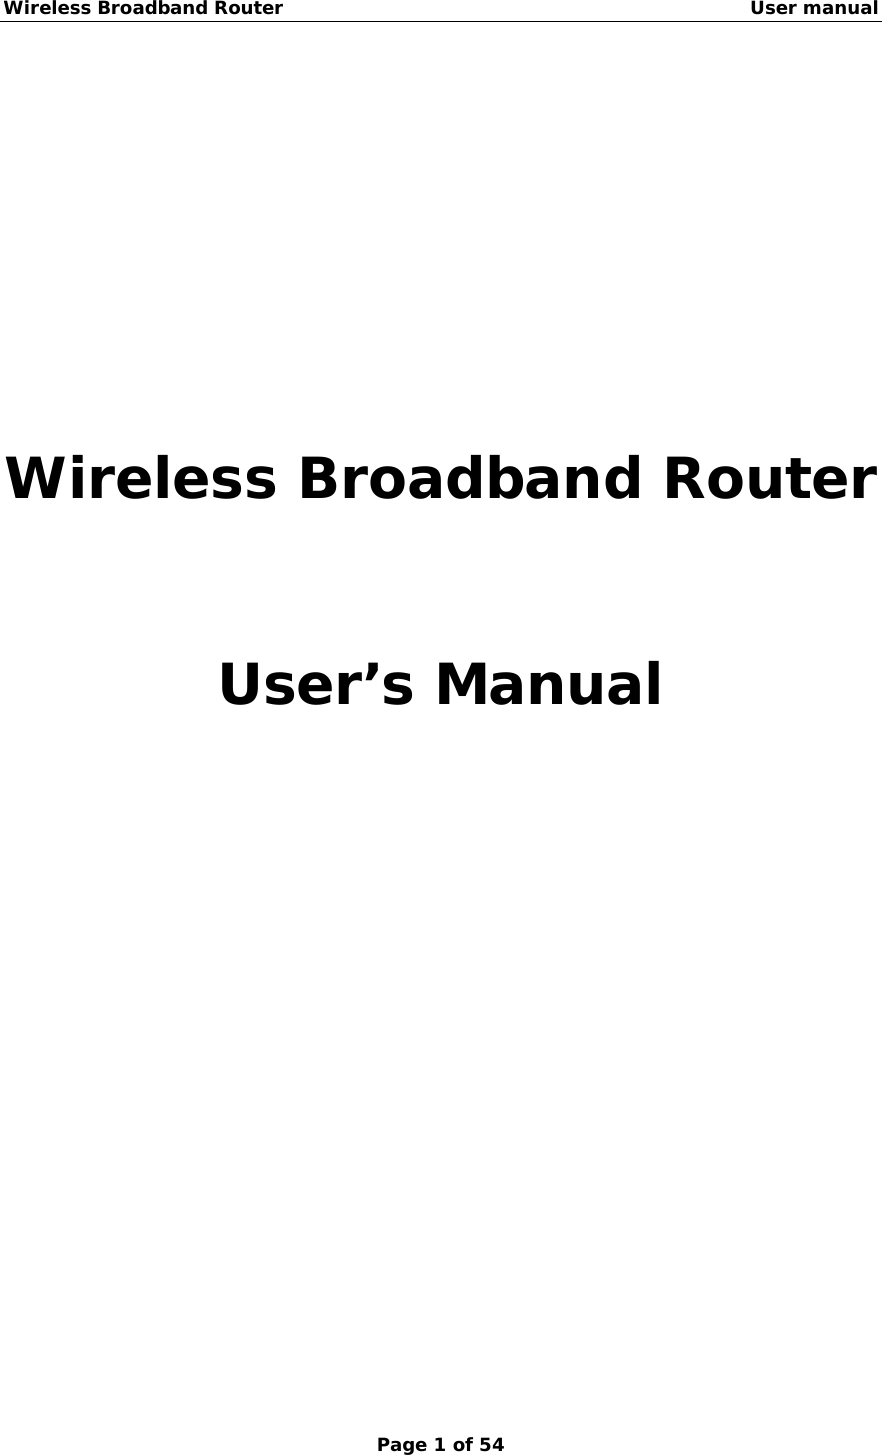 Wireless Broadband Router                                                   User manual Page 1 of 54       Wireless Broadband Router   User’s Manual                 